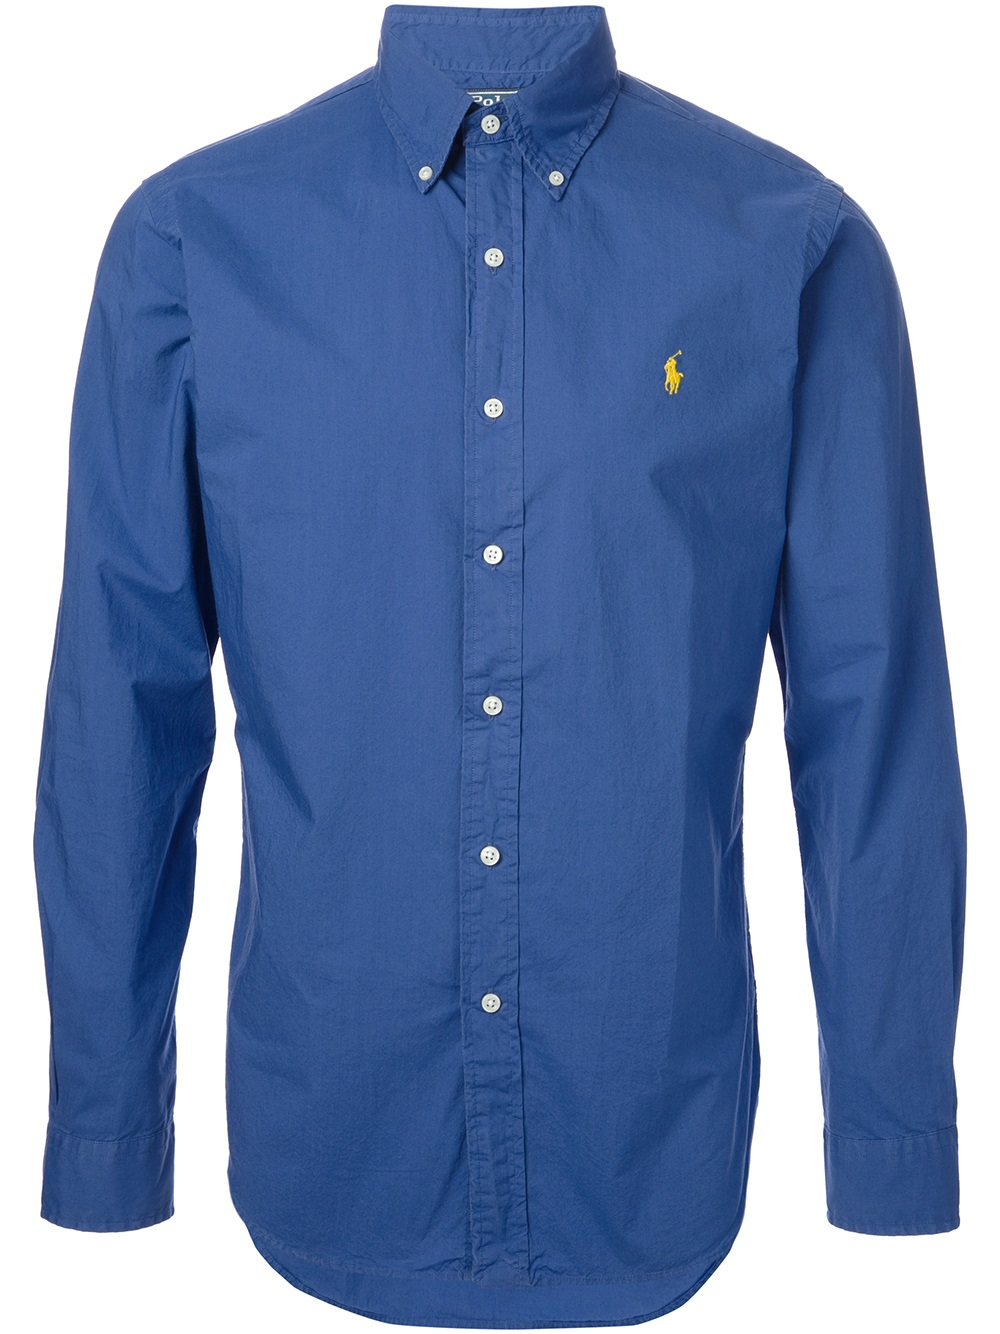 Polo Ralph Lauren Classic Casual Shirt in Blue for Men - Lyst